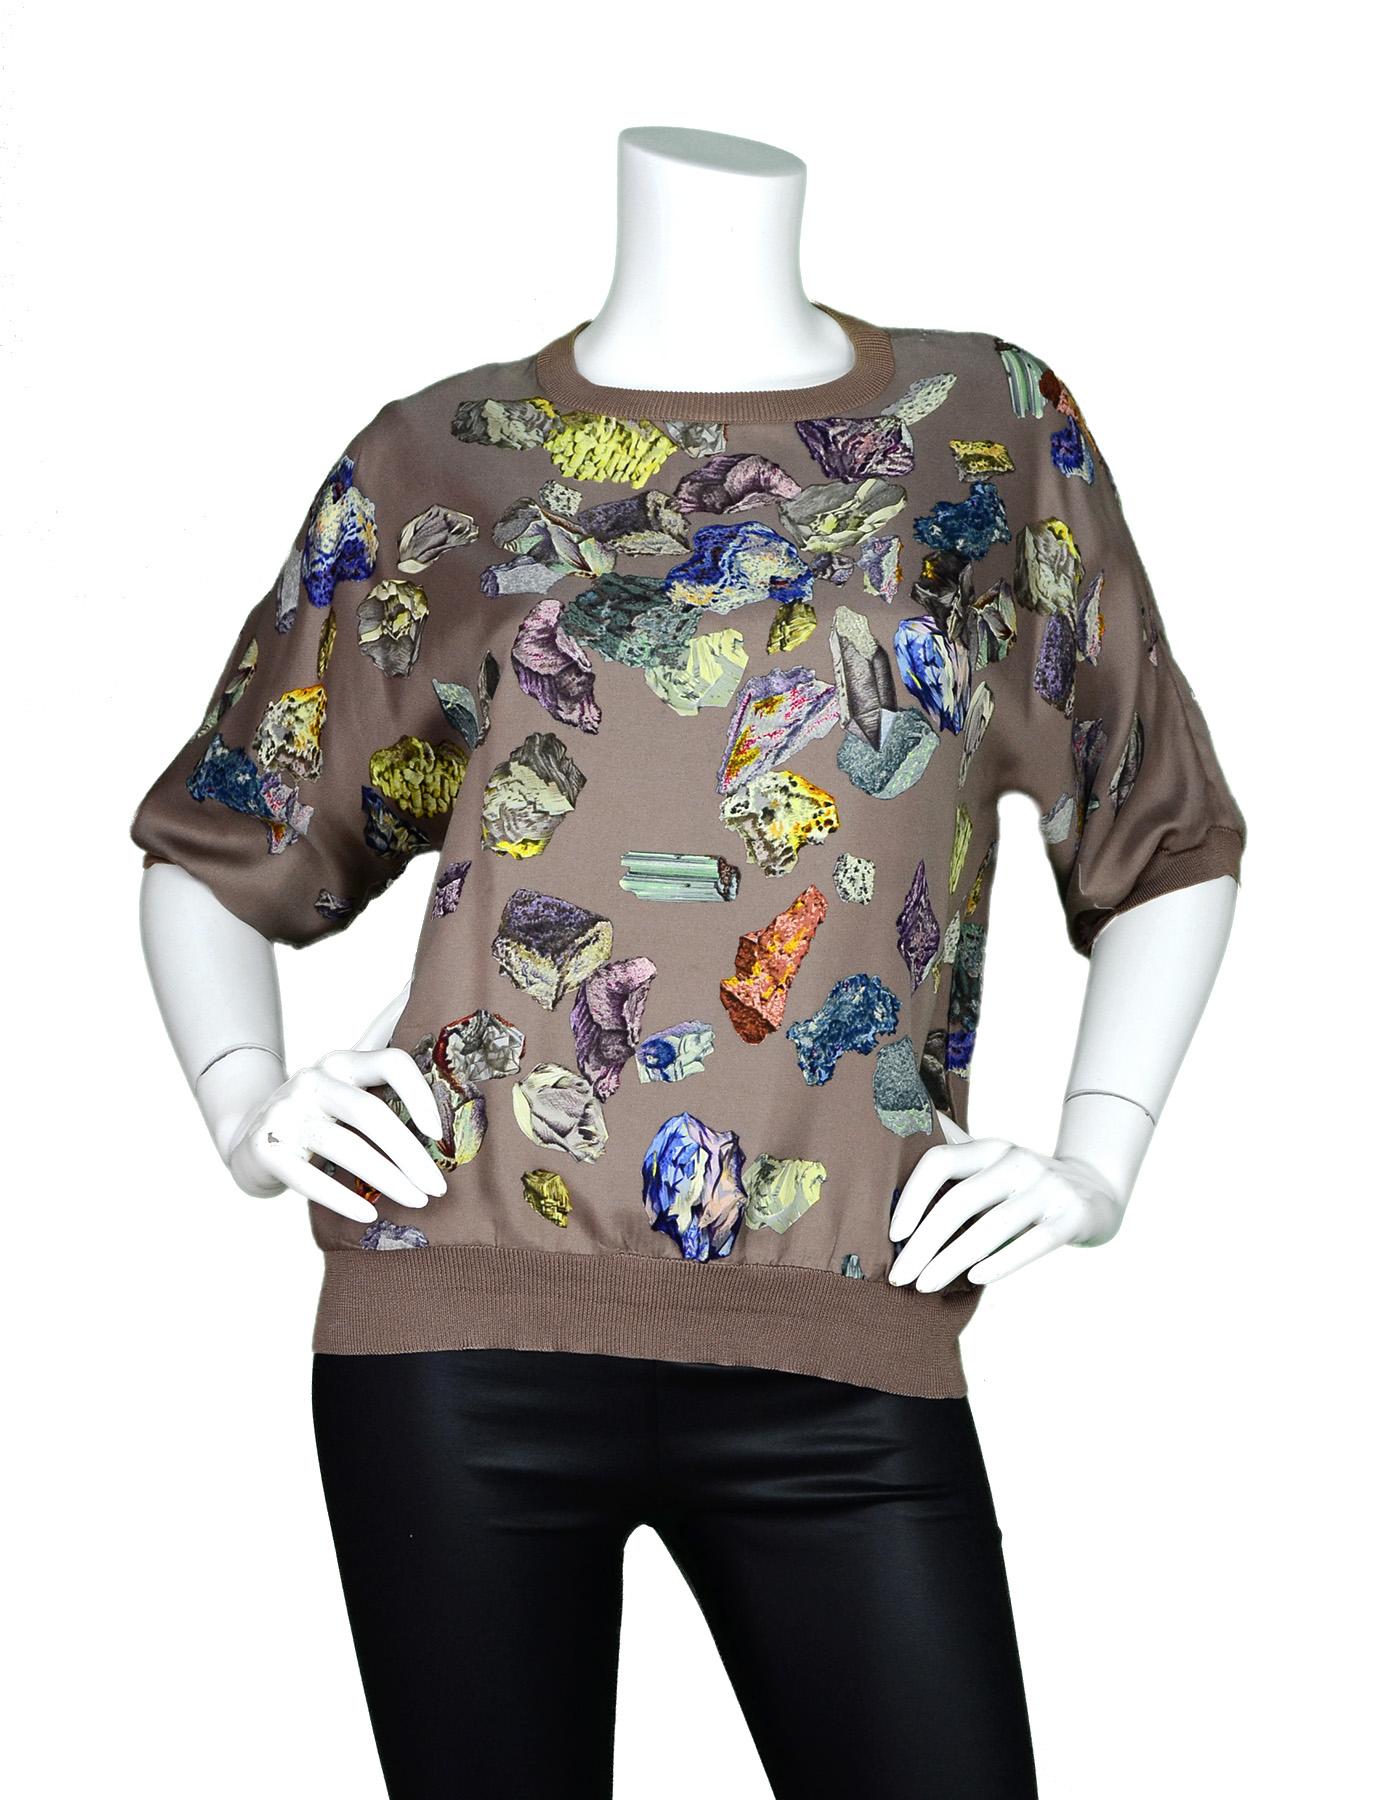 Hermes Vintage Tan Silk Short Sleeve Crew Neck Top W/ Gem Rock Design Sz 42

Made In: France
Color: Tan and multi-color
Materials: 100% silk
Opening/Closure: Pull over
Overall Condition: Excellent vintage, pre-owned condition with the exception of a